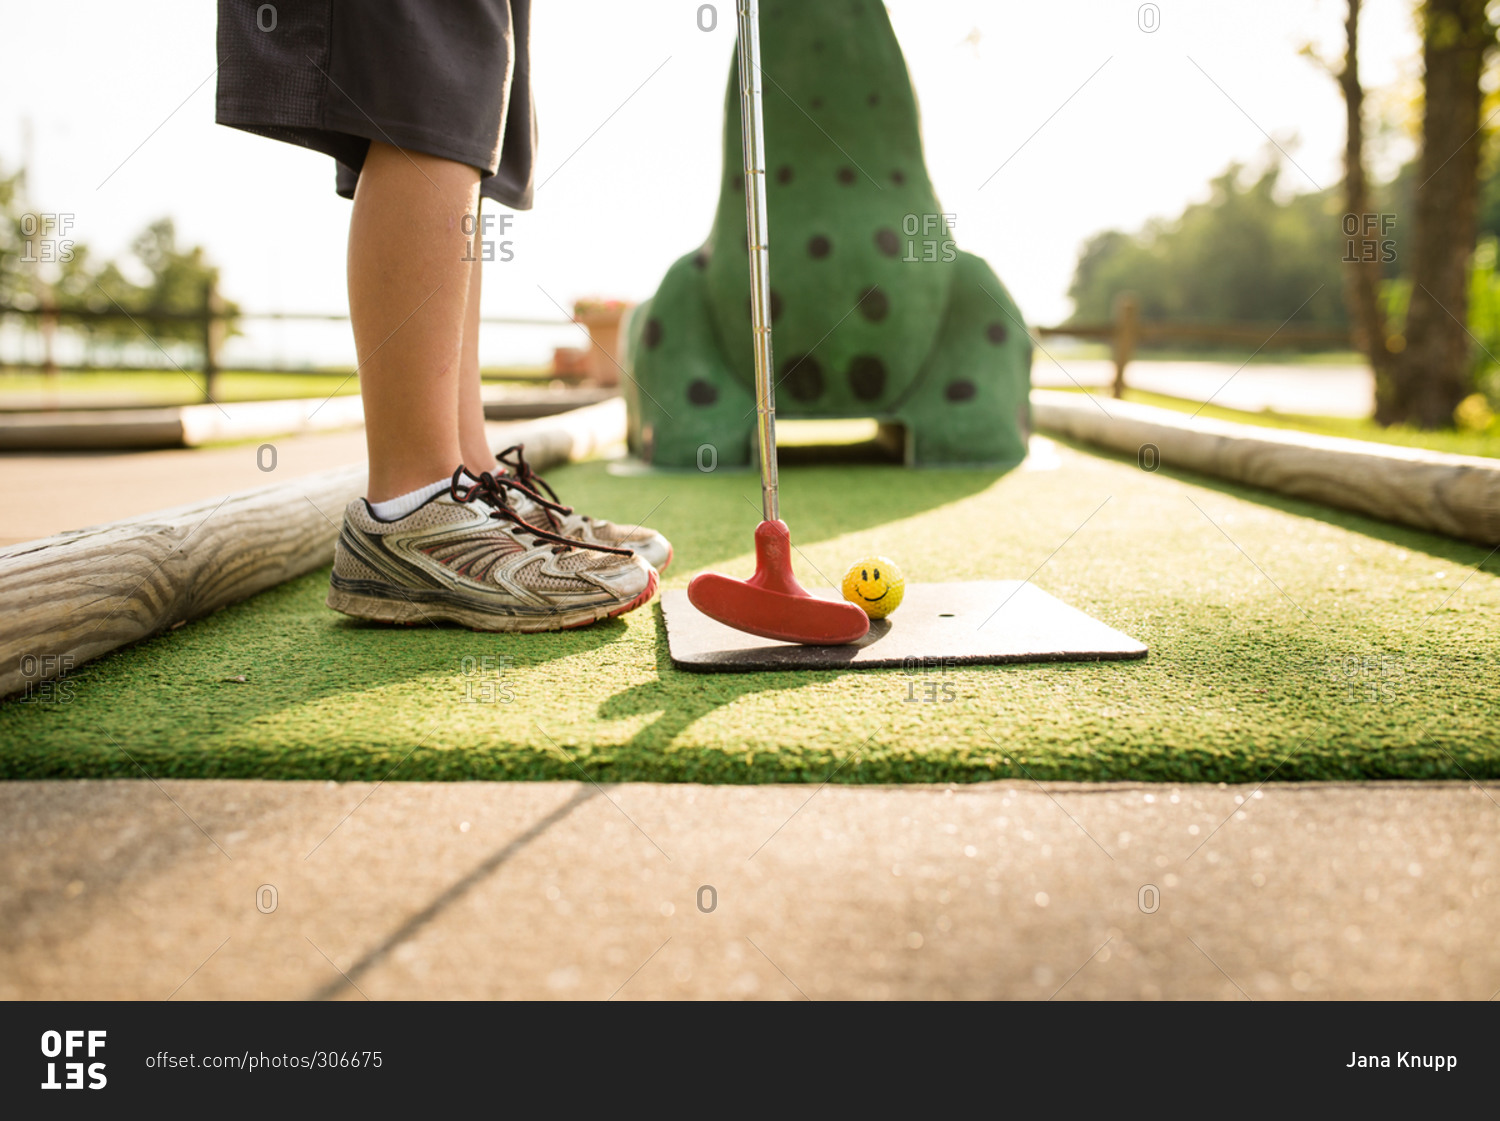 Low section of boy playing mini golf